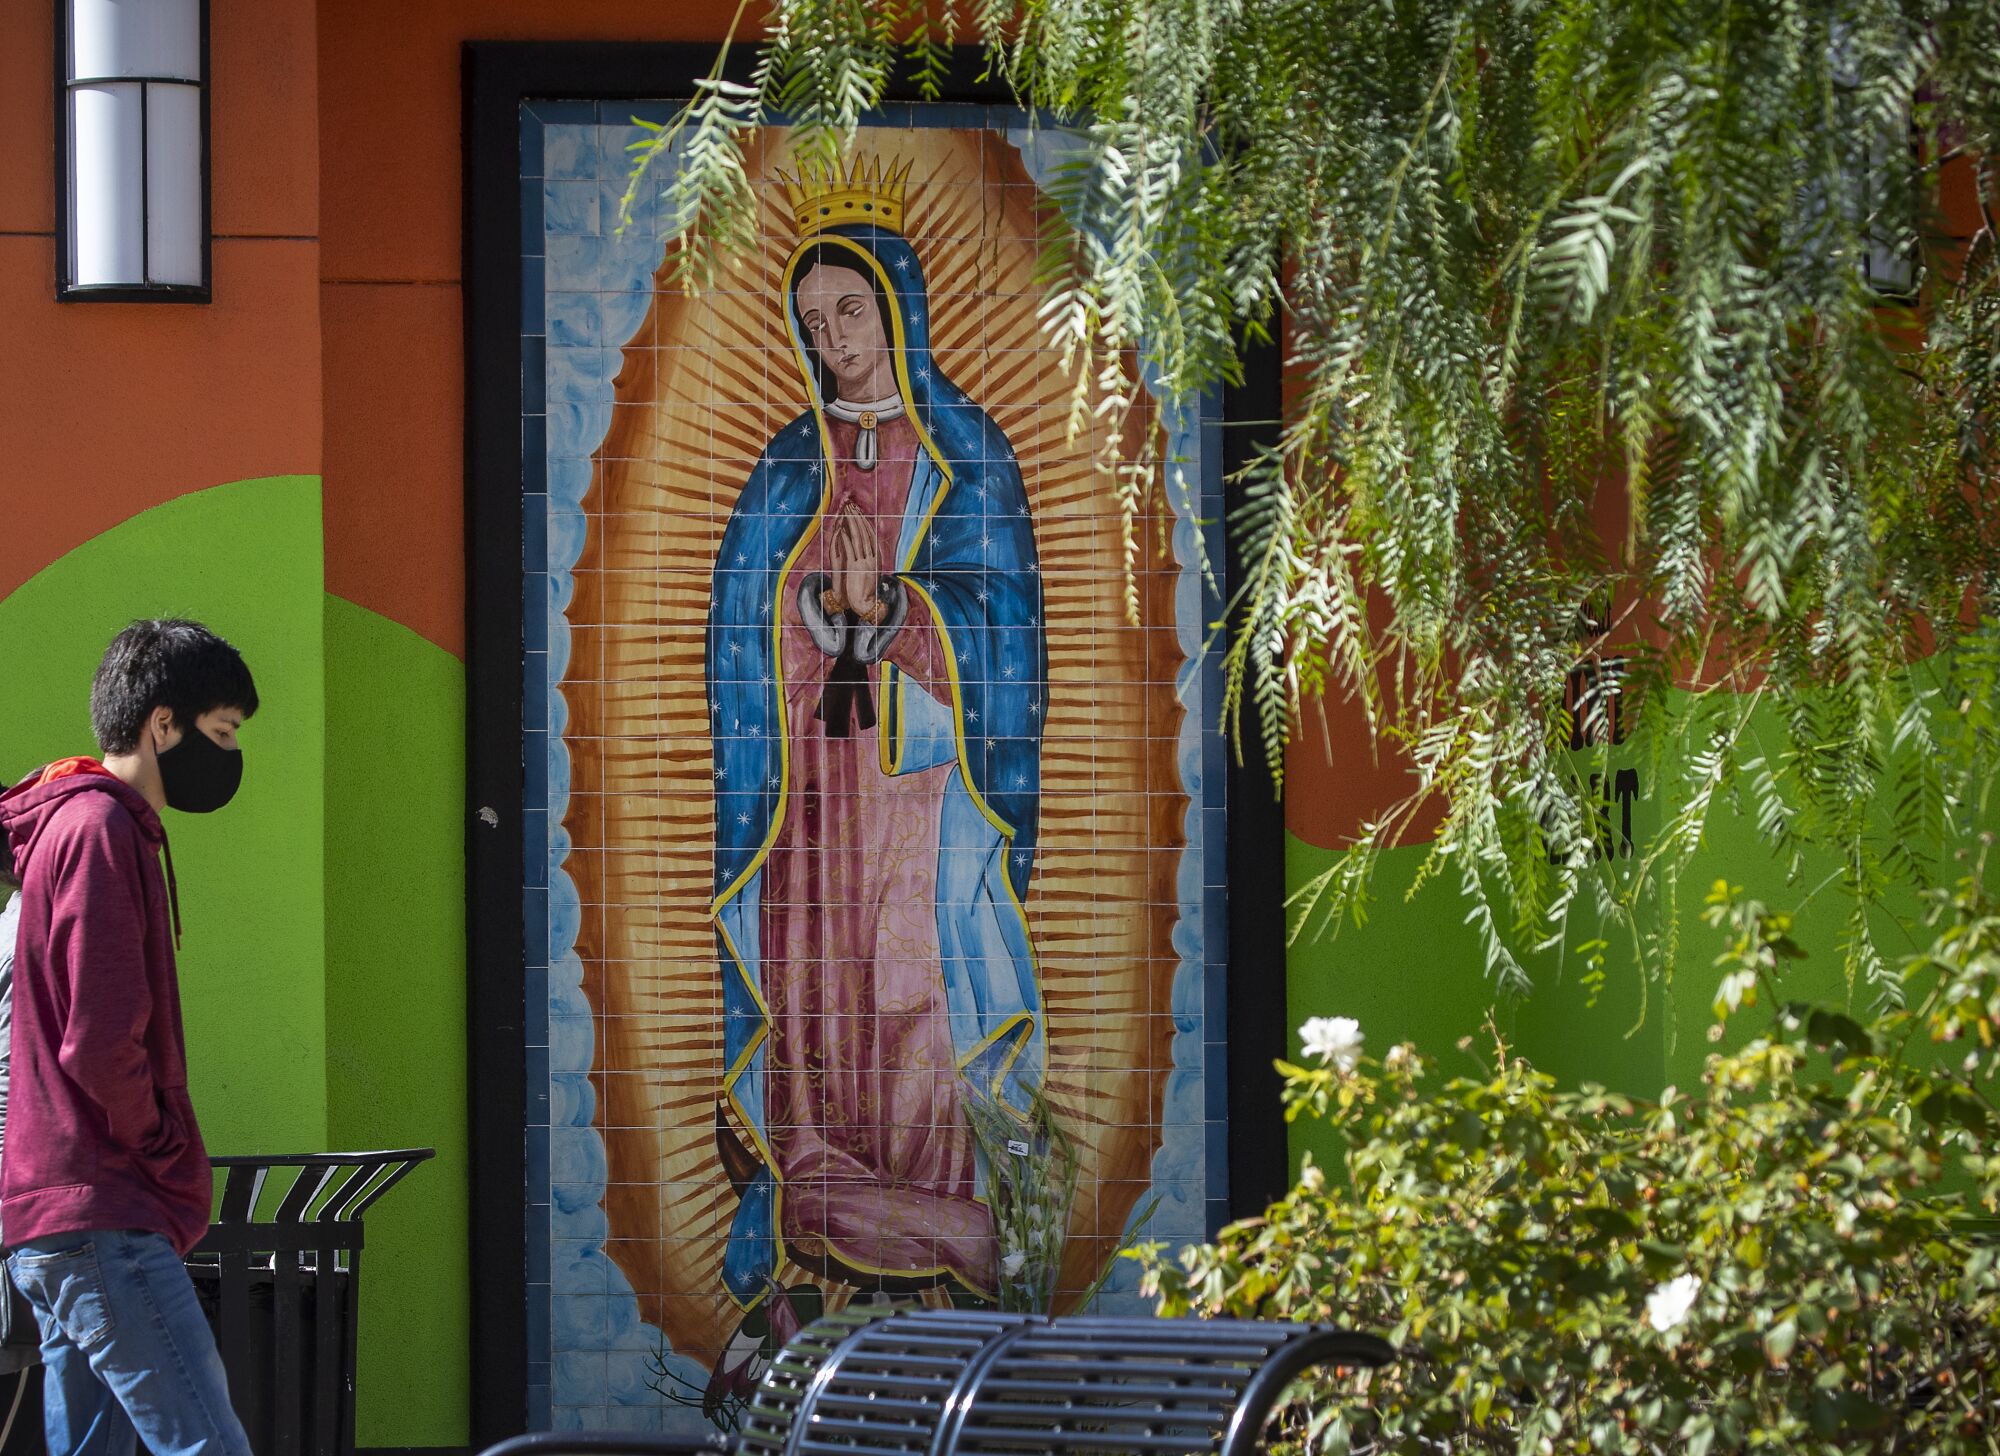 A tile mural of the Virgin of Guadalupe